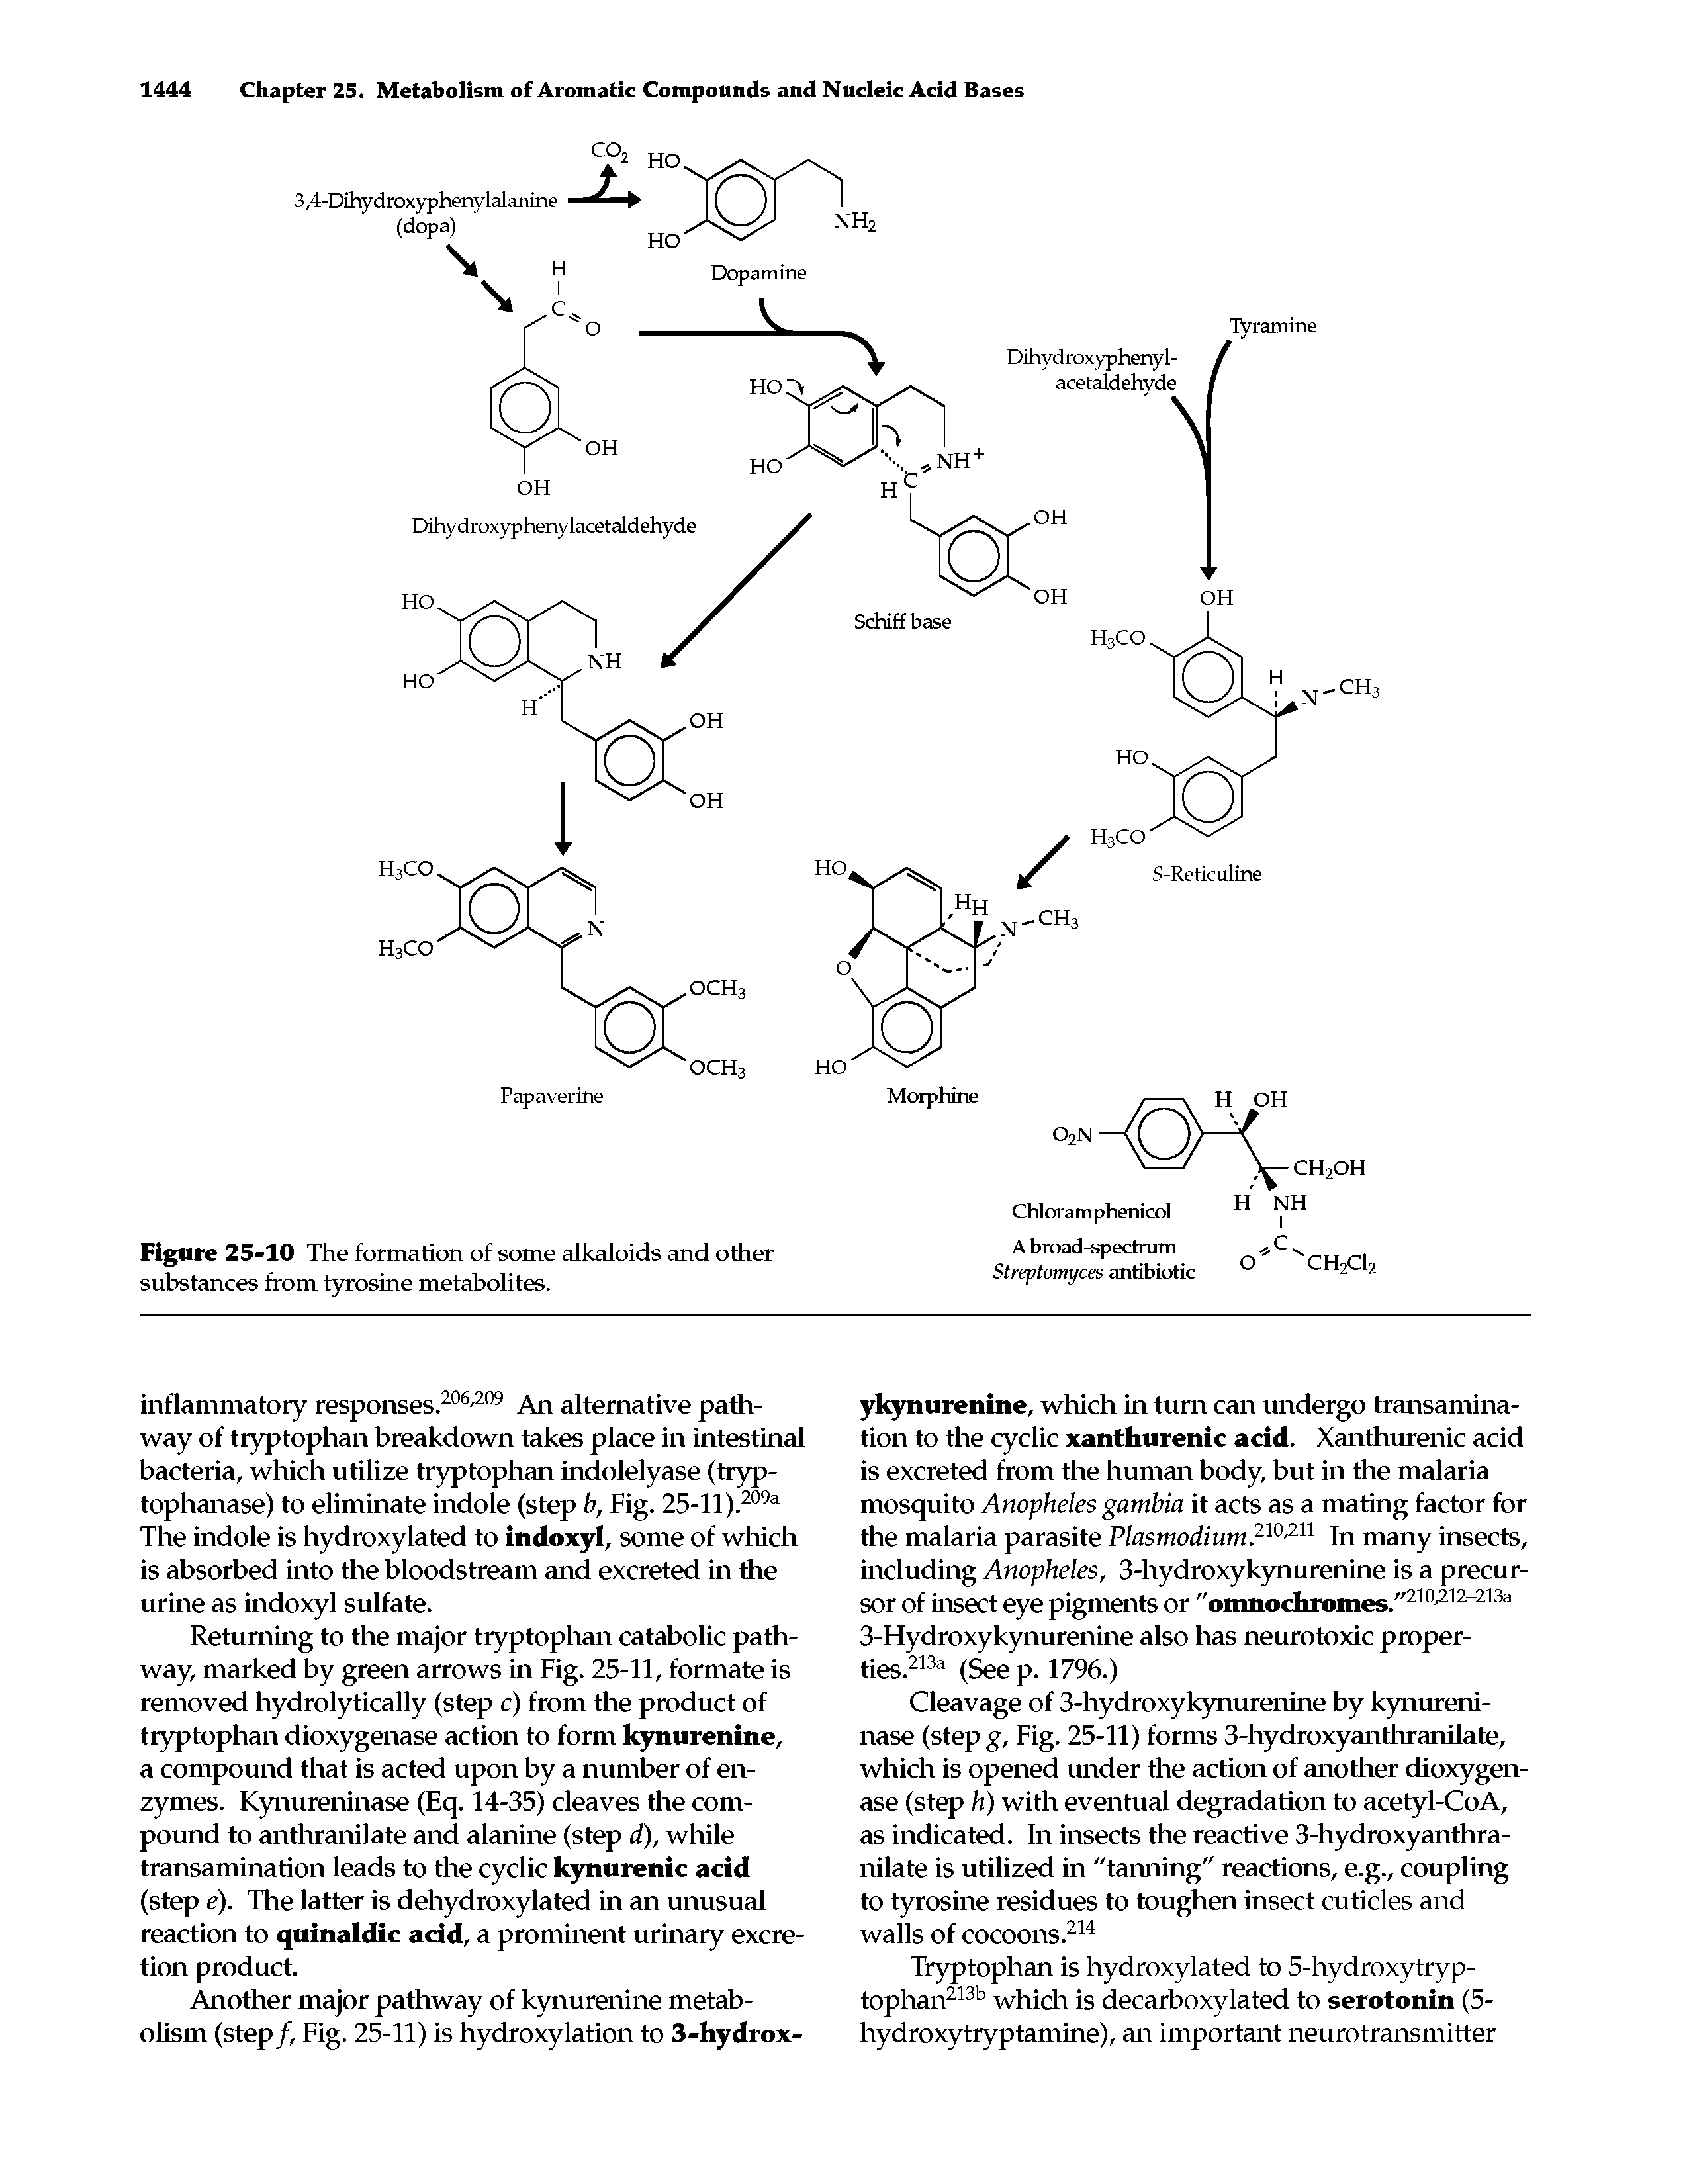 Figure 25-10 The formation of some alkaloids and other substances from tyrosine metabolites.